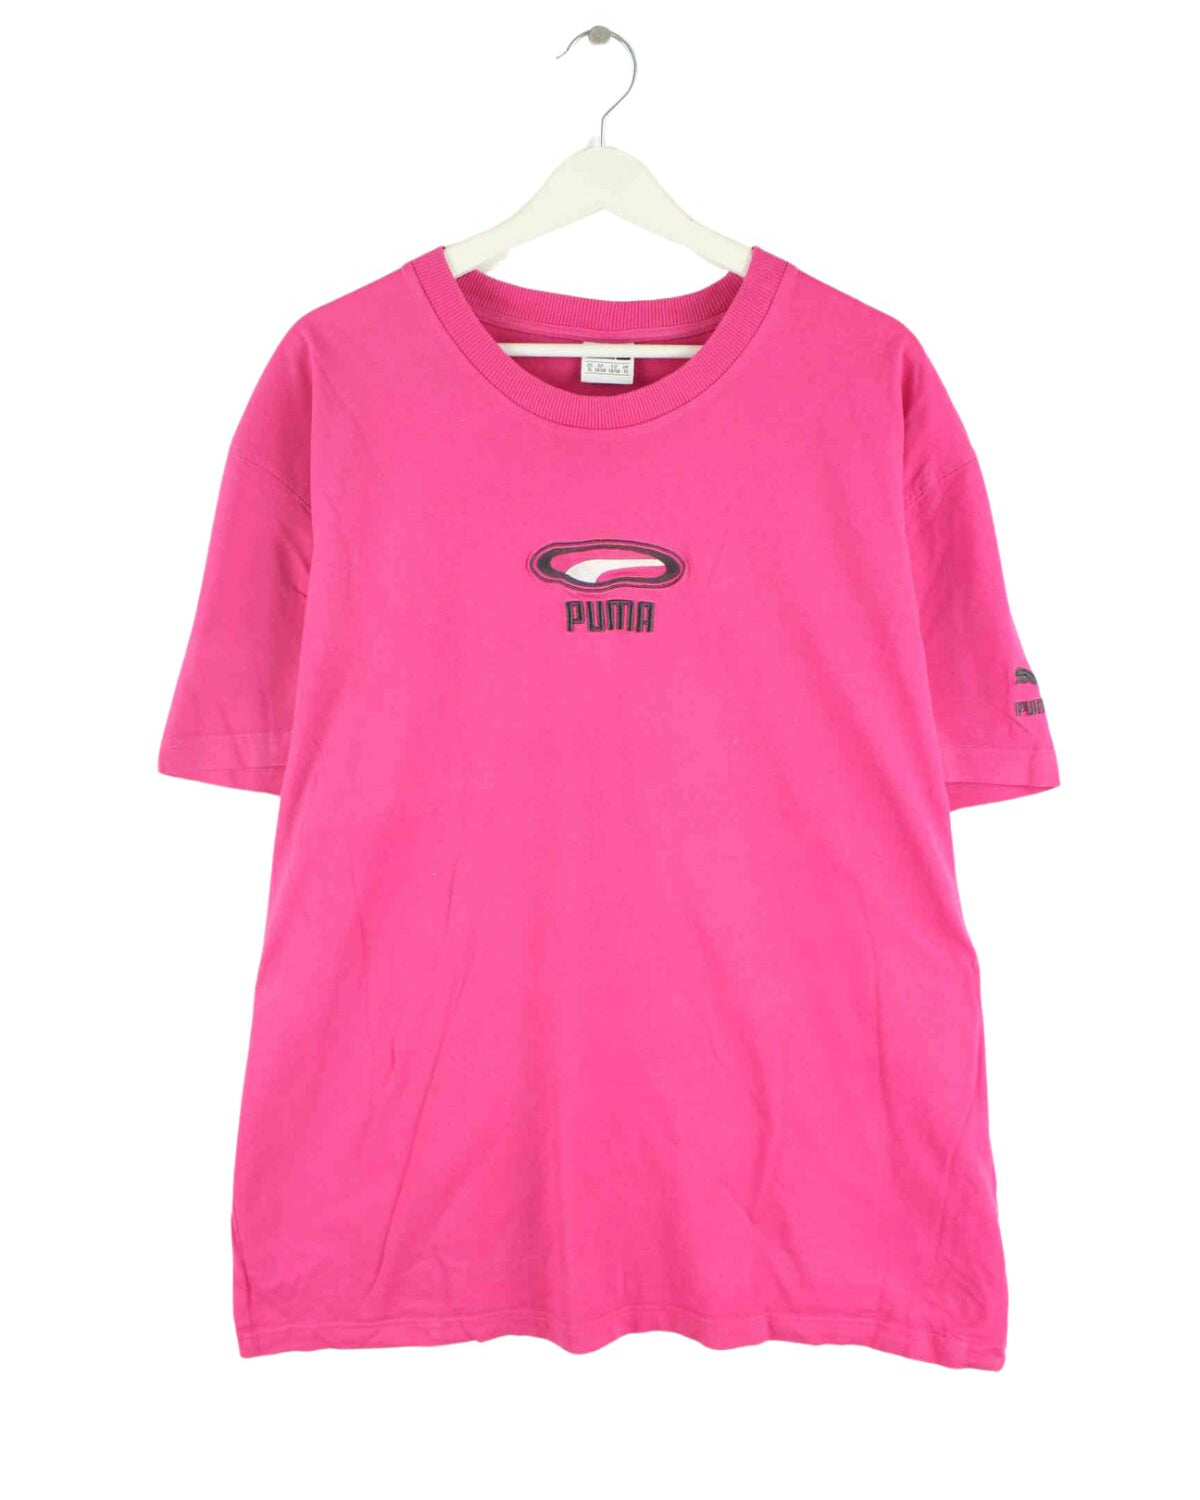 Puma 80s Embroidered T-Shirt Pink XL (front image)